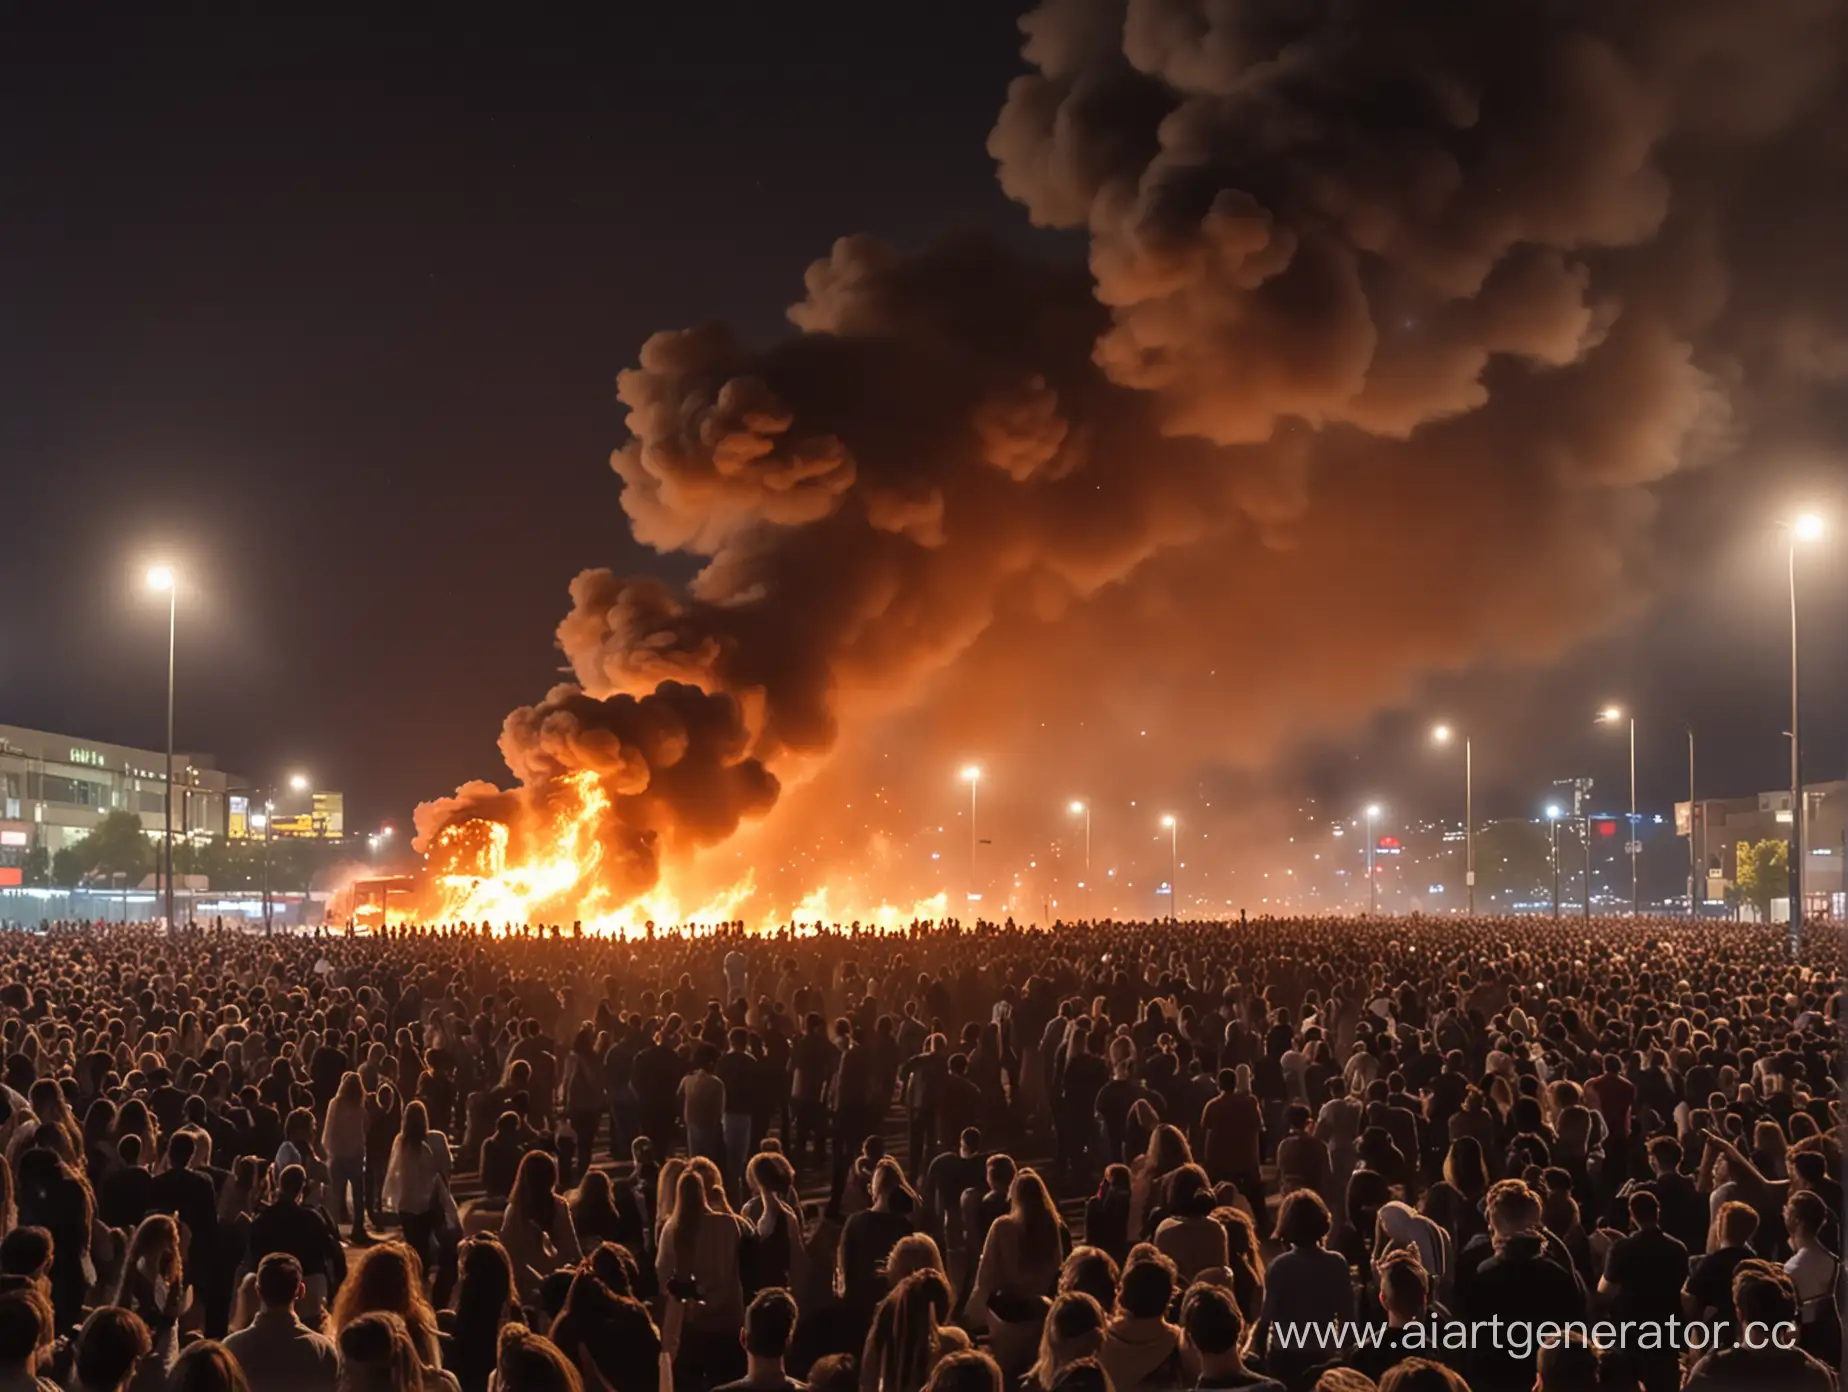 Concert-Audience-Amidst-Fire-and-Chaos